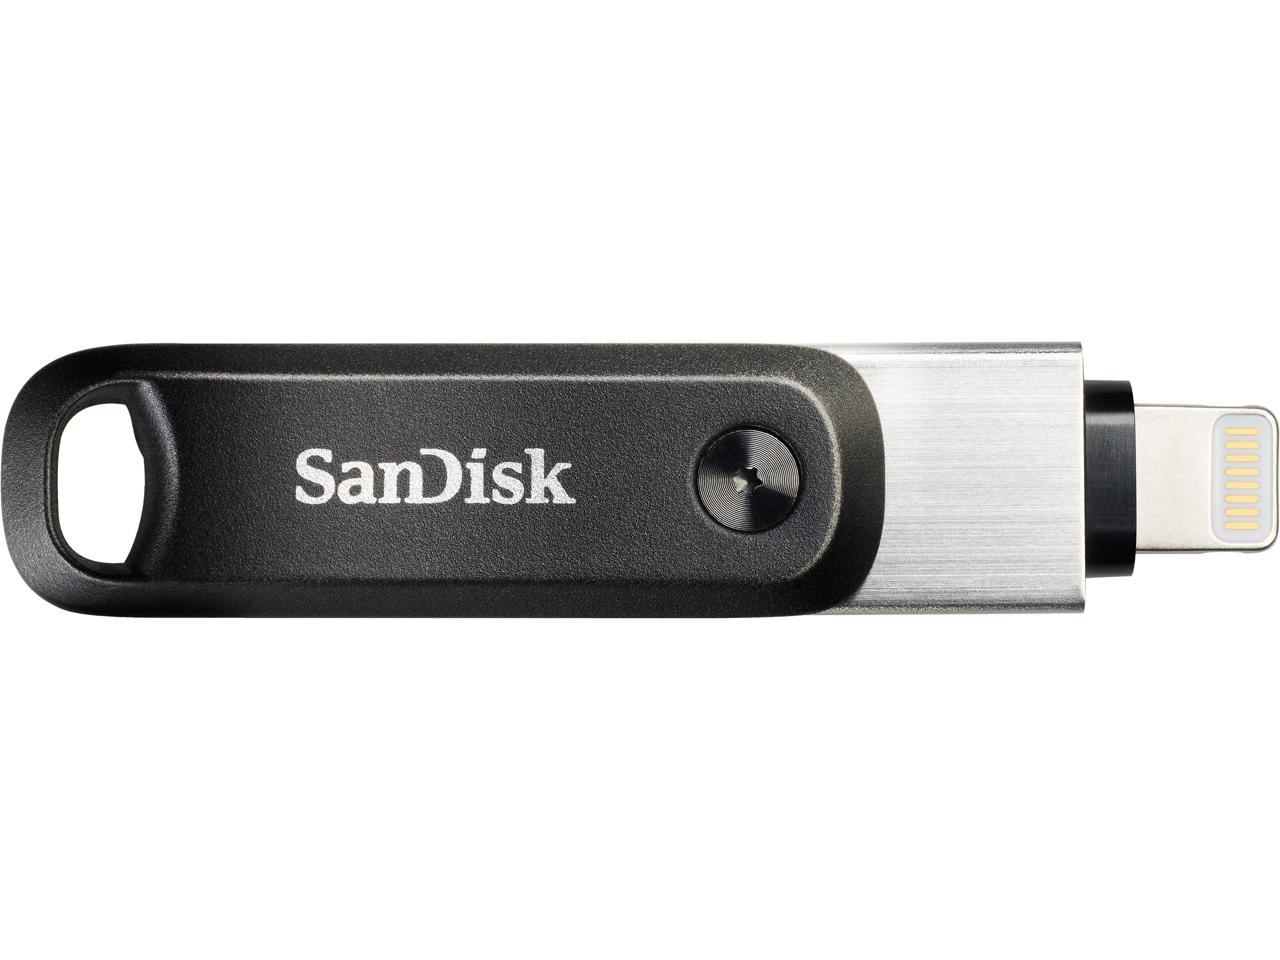 SanDisk iXpand Flash Drive Review (32GB) - Impulse Gamer